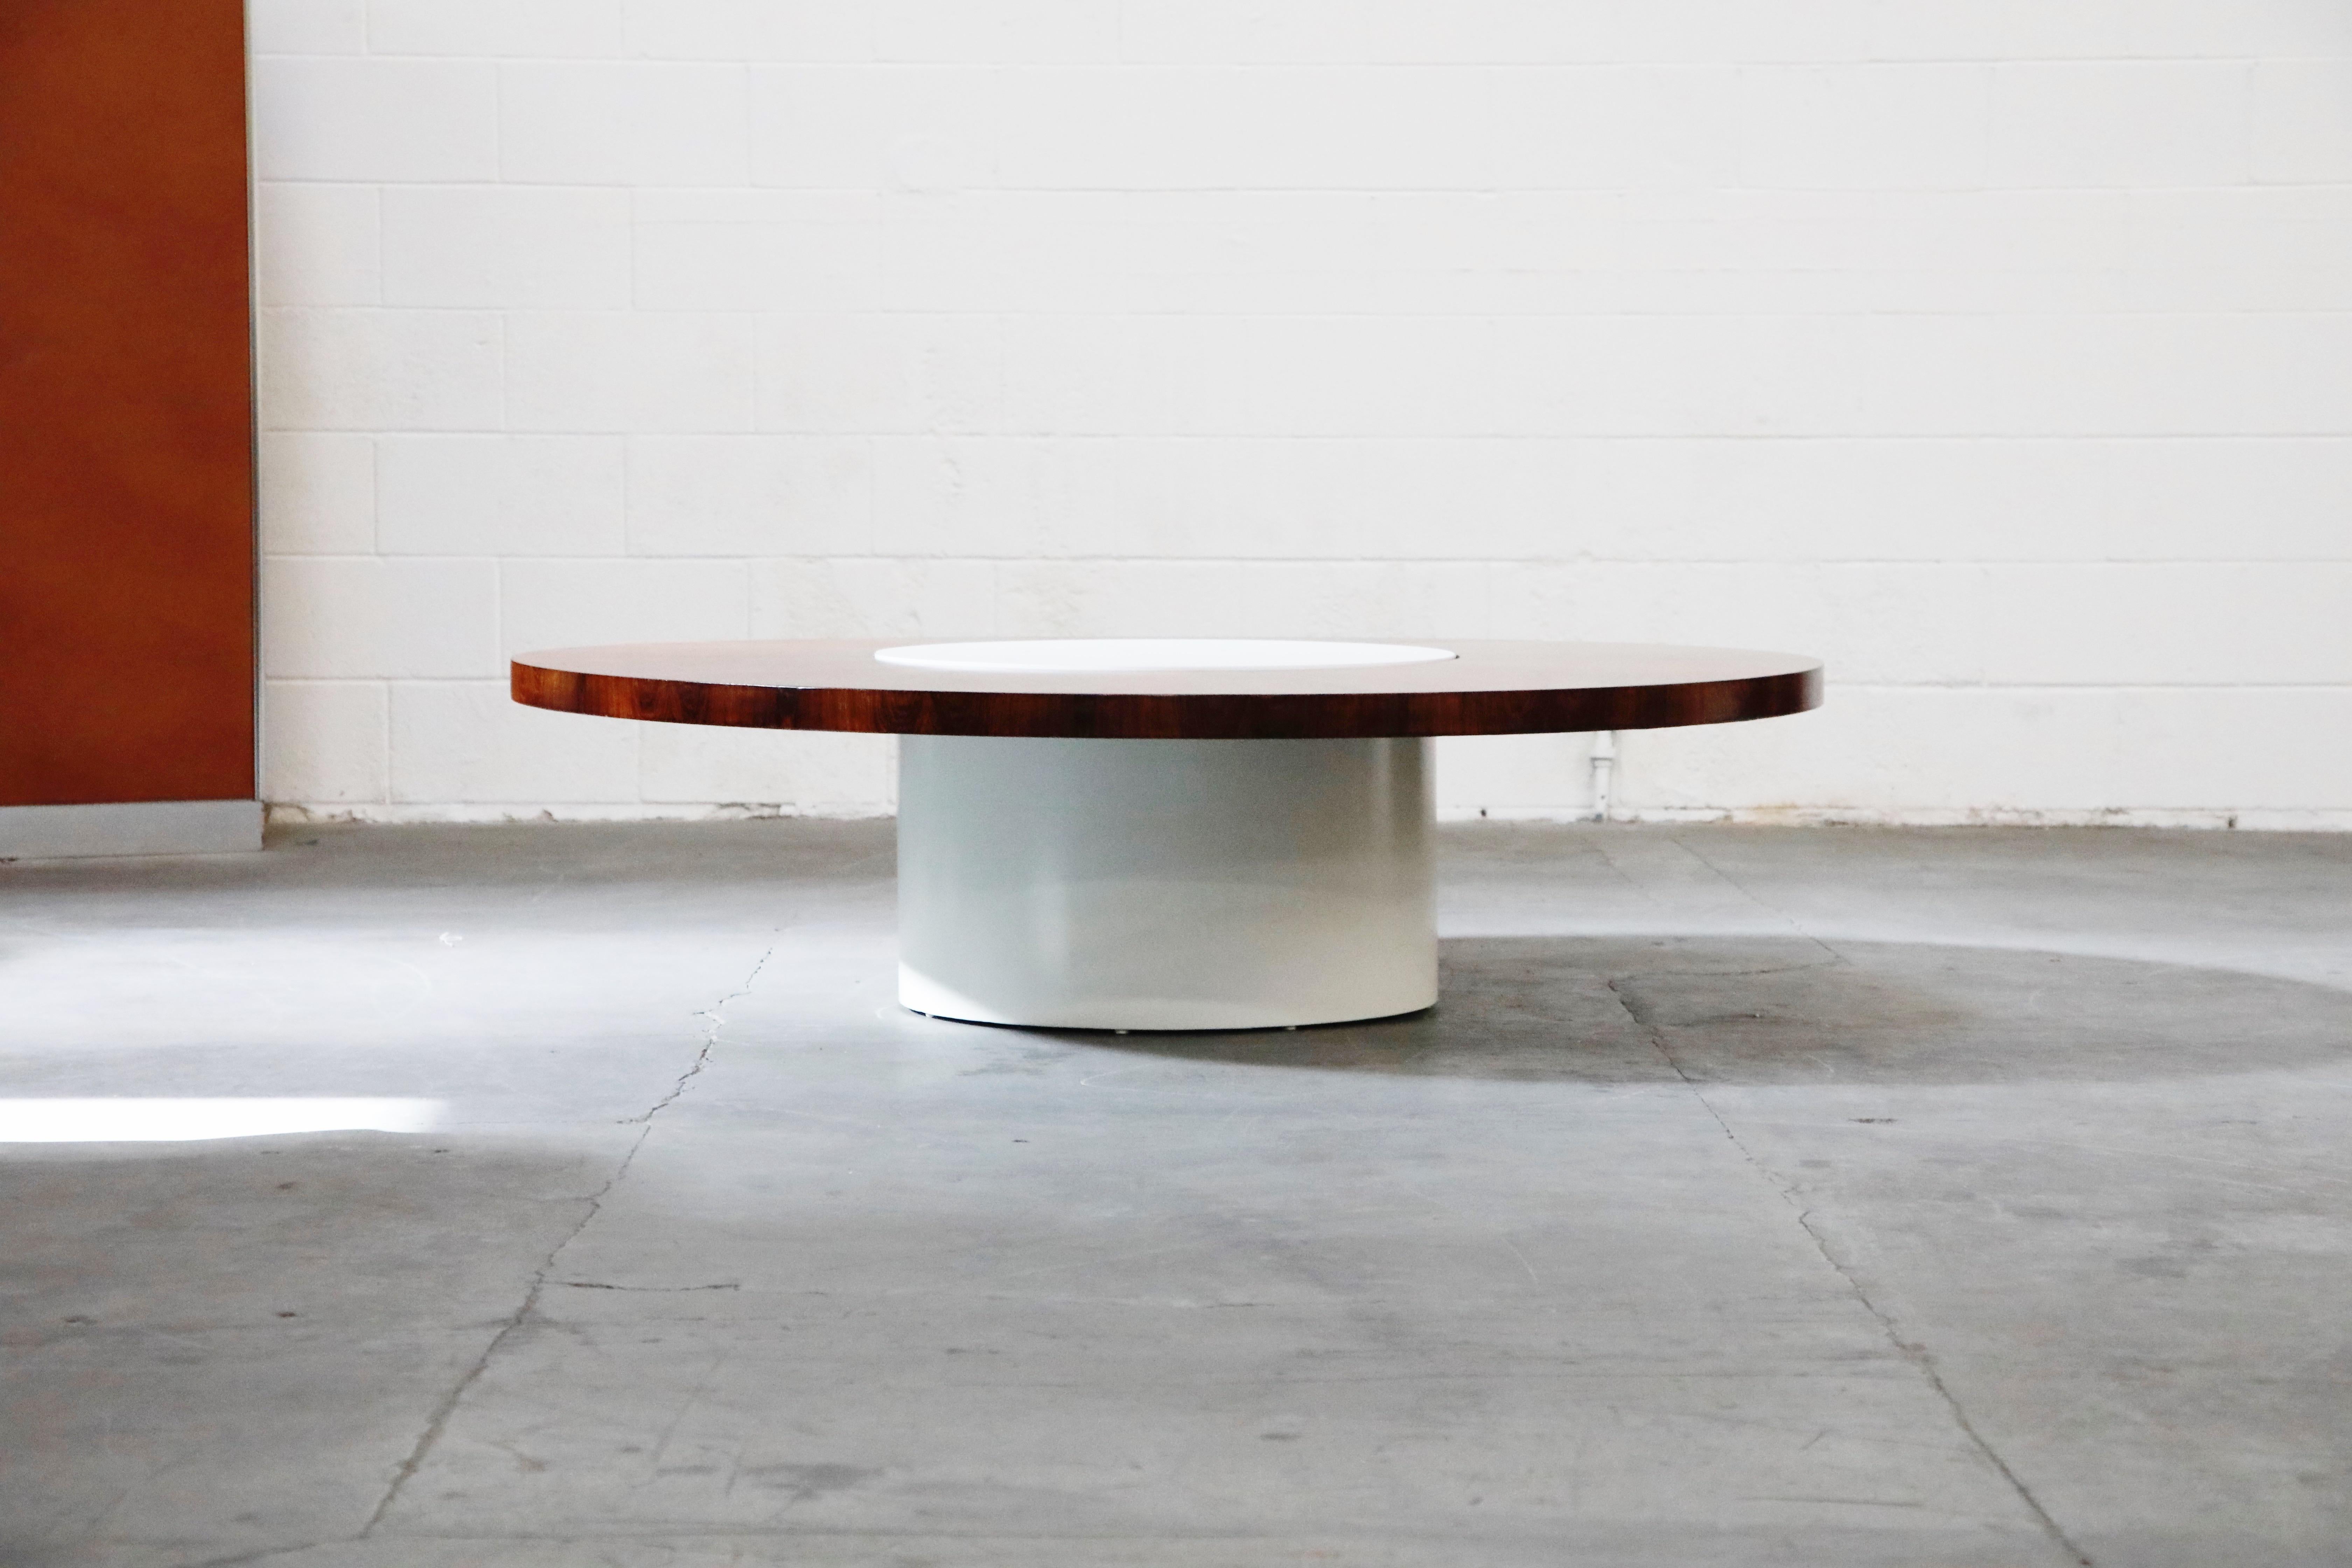 This rare incredible rotating Lazy-Susan cocktail table was designed by Milo Baughman for Thayer Coggin. Featuring a stunning Rosewood top with vivid grain and detail, and a white Formica cylindrical base. The Rosewood top rotates when spun so that